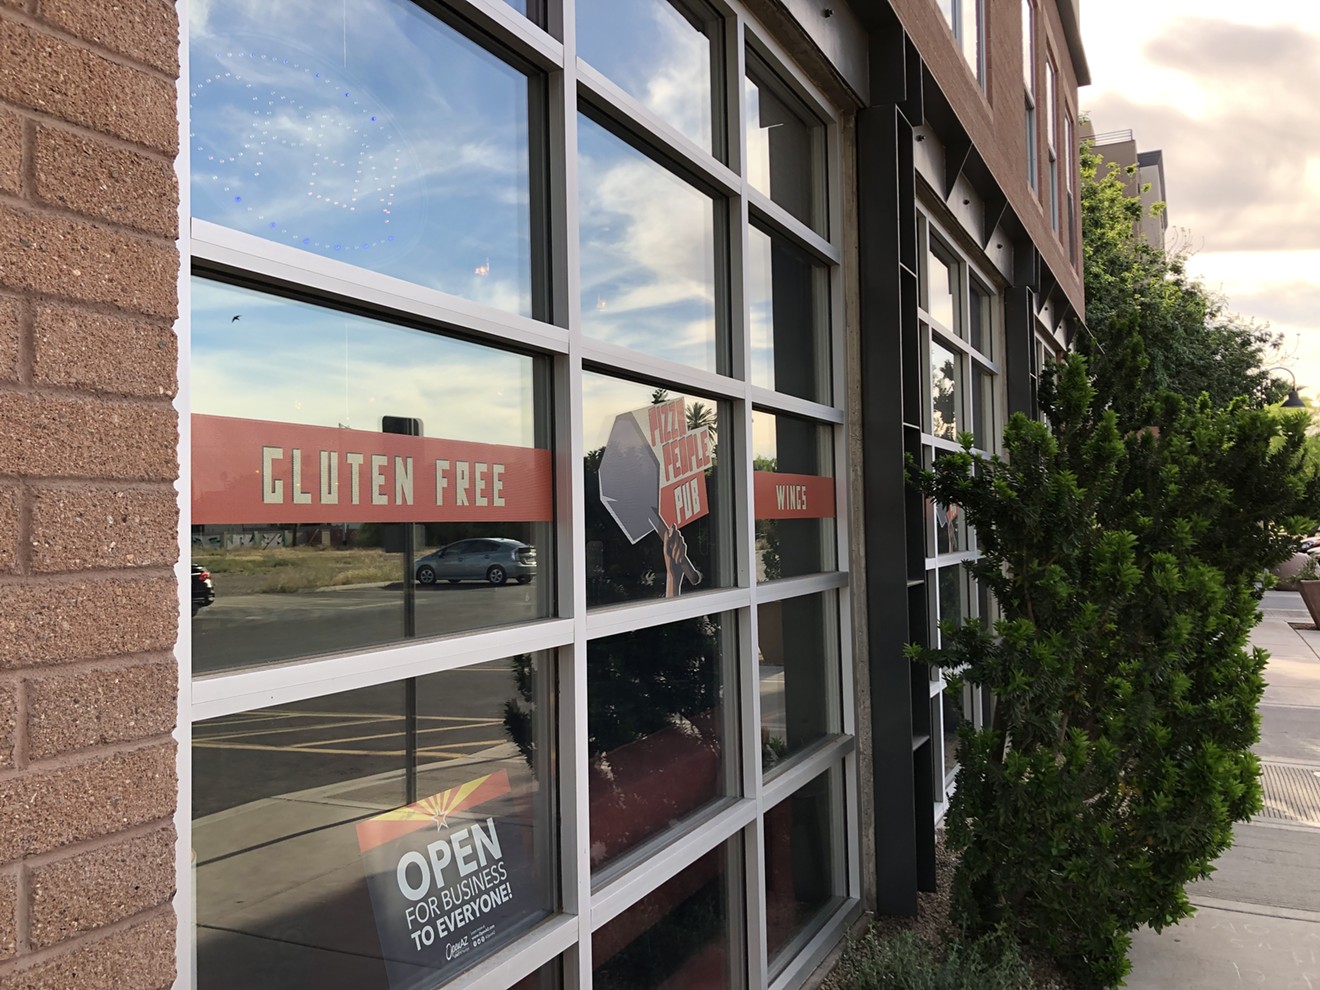 Gluten-free options are all over the Valley.